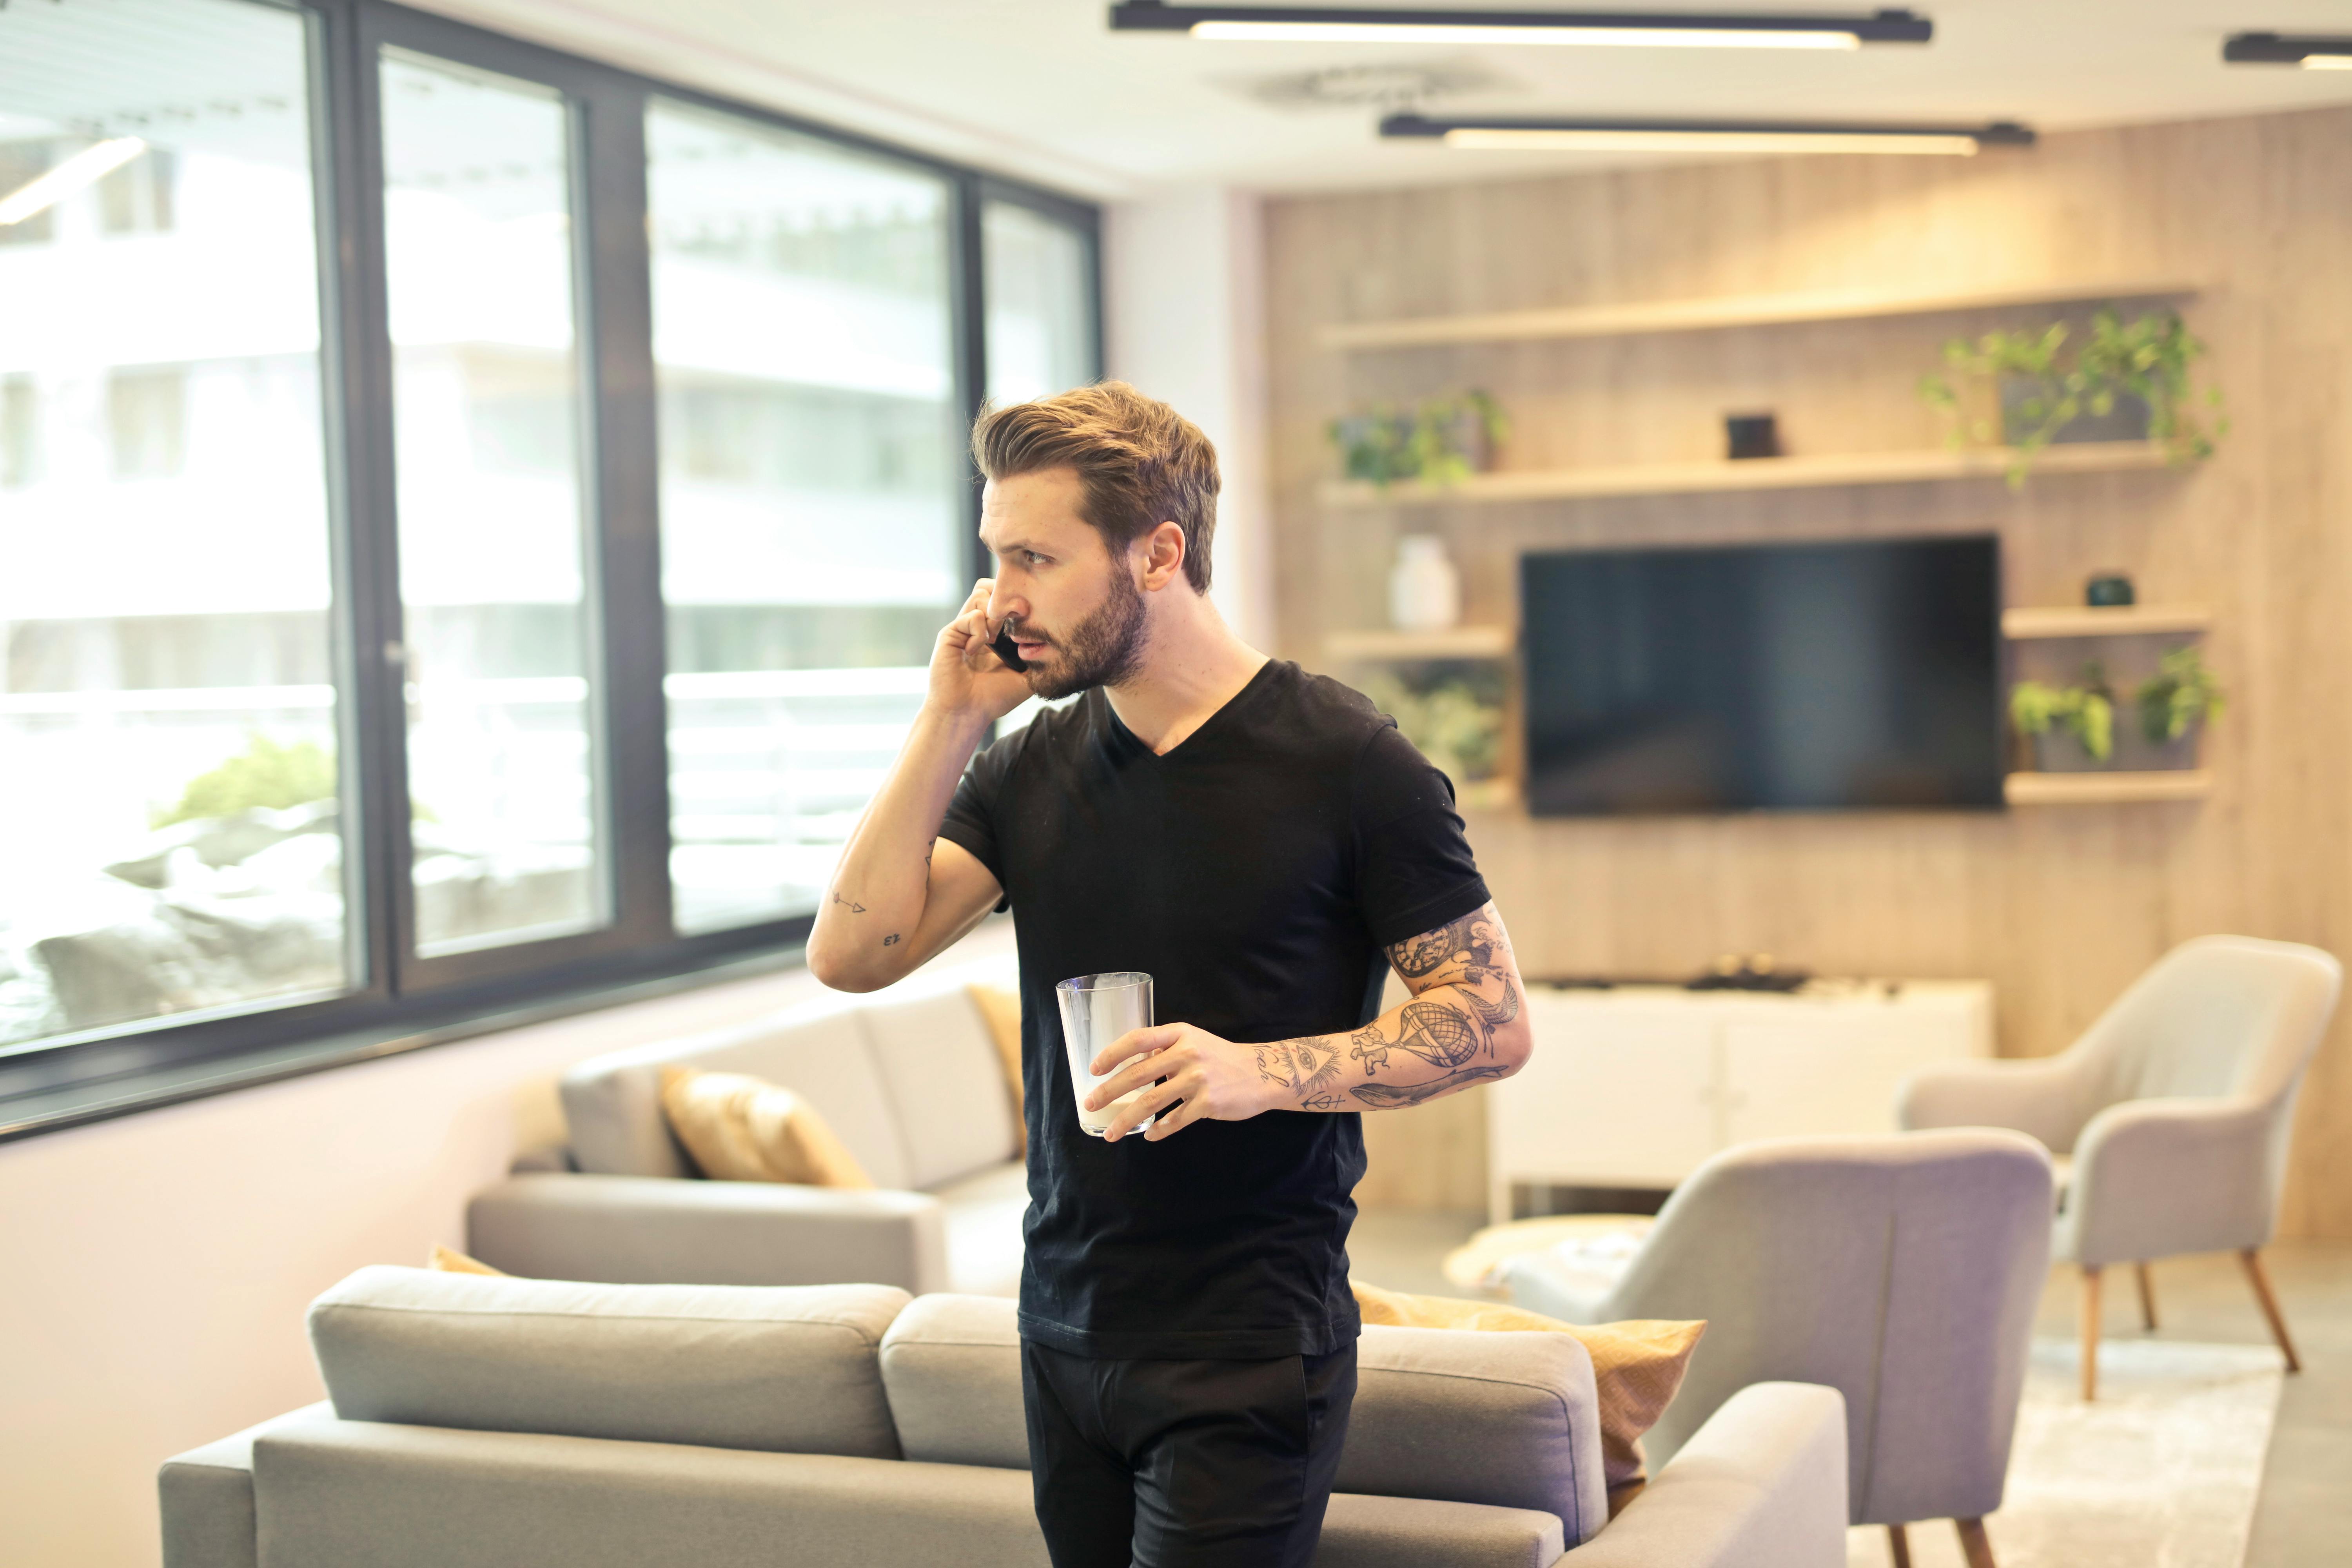 A man talking to someone on the phone | Source: Pexels